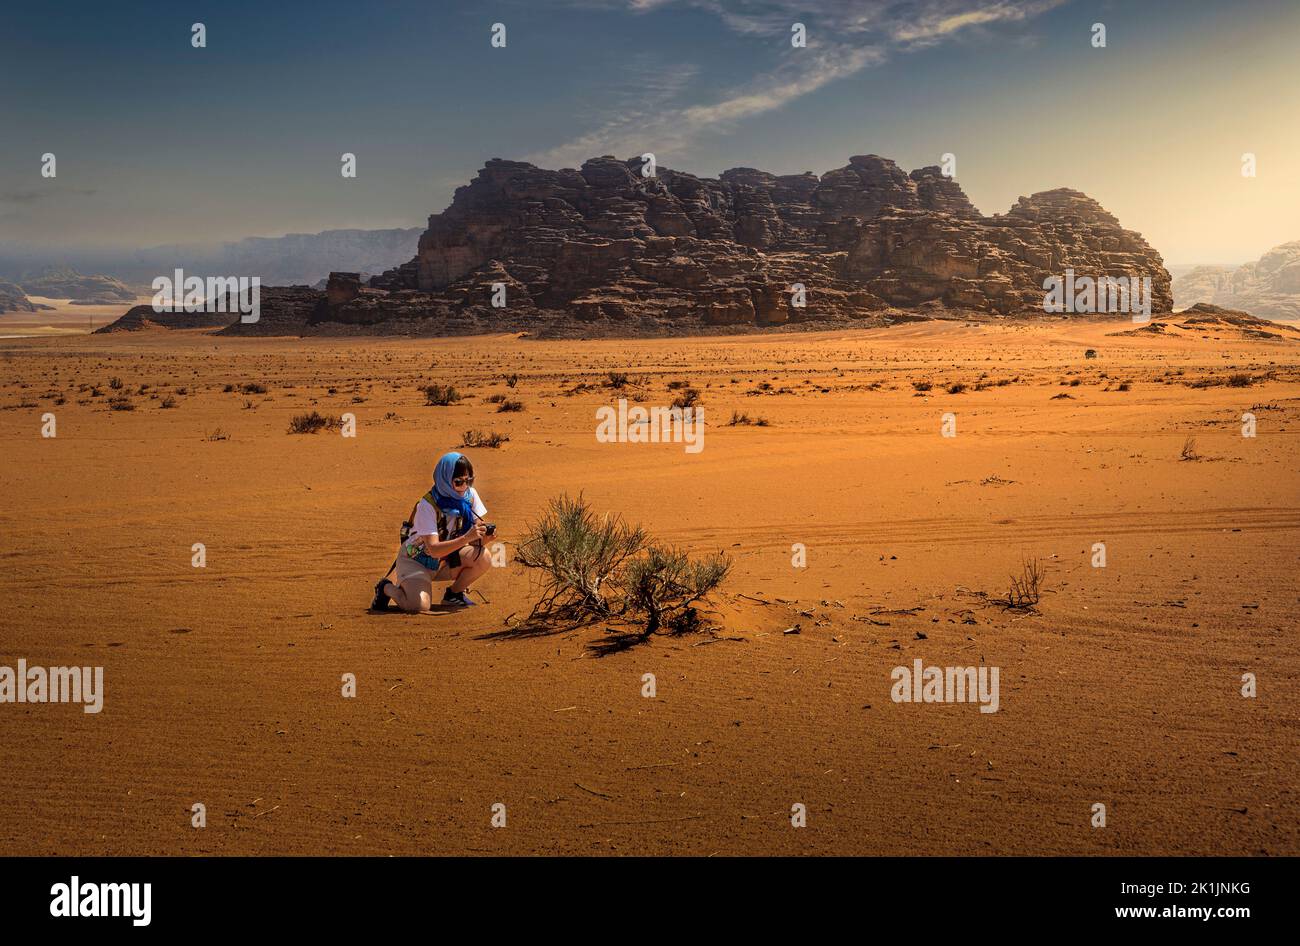 The Jordanian desert at Wadi Rum or Valley of the Moon Stock Photo